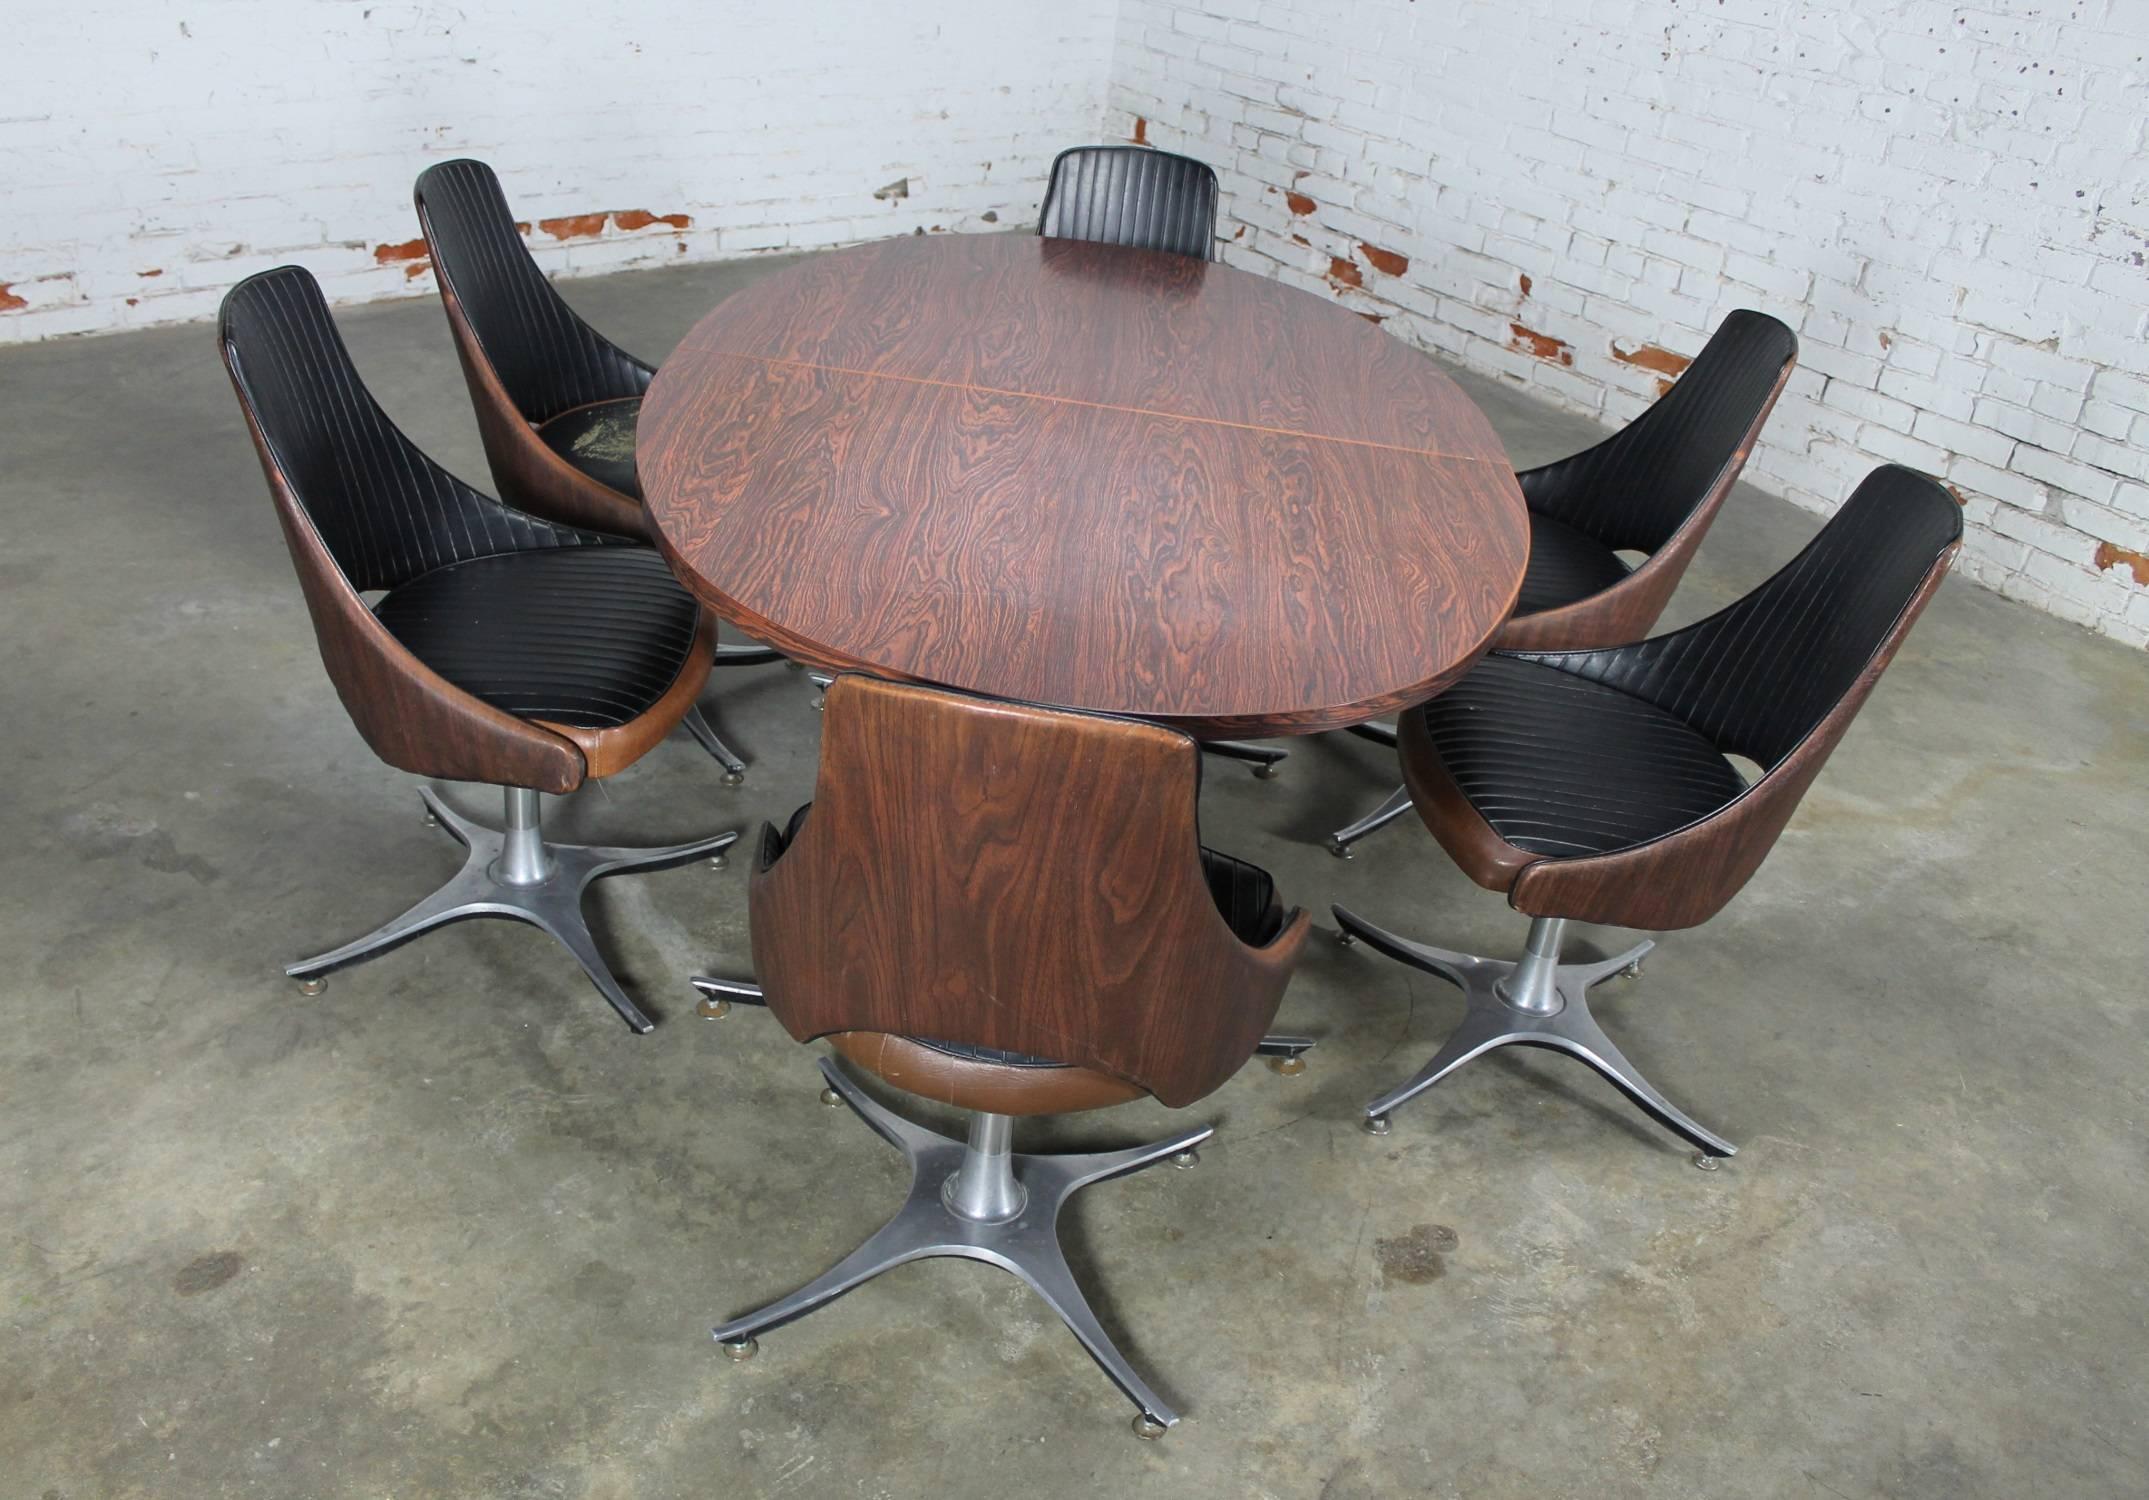 Fun and funky Mid-Century Modern dinette set featuring an oval table with double pedestal base of aluminum and six two toned wood grained and black vinyl swivel chairs with aluminum bases. In good vintage condition.
OK. I give up. I can’t find the